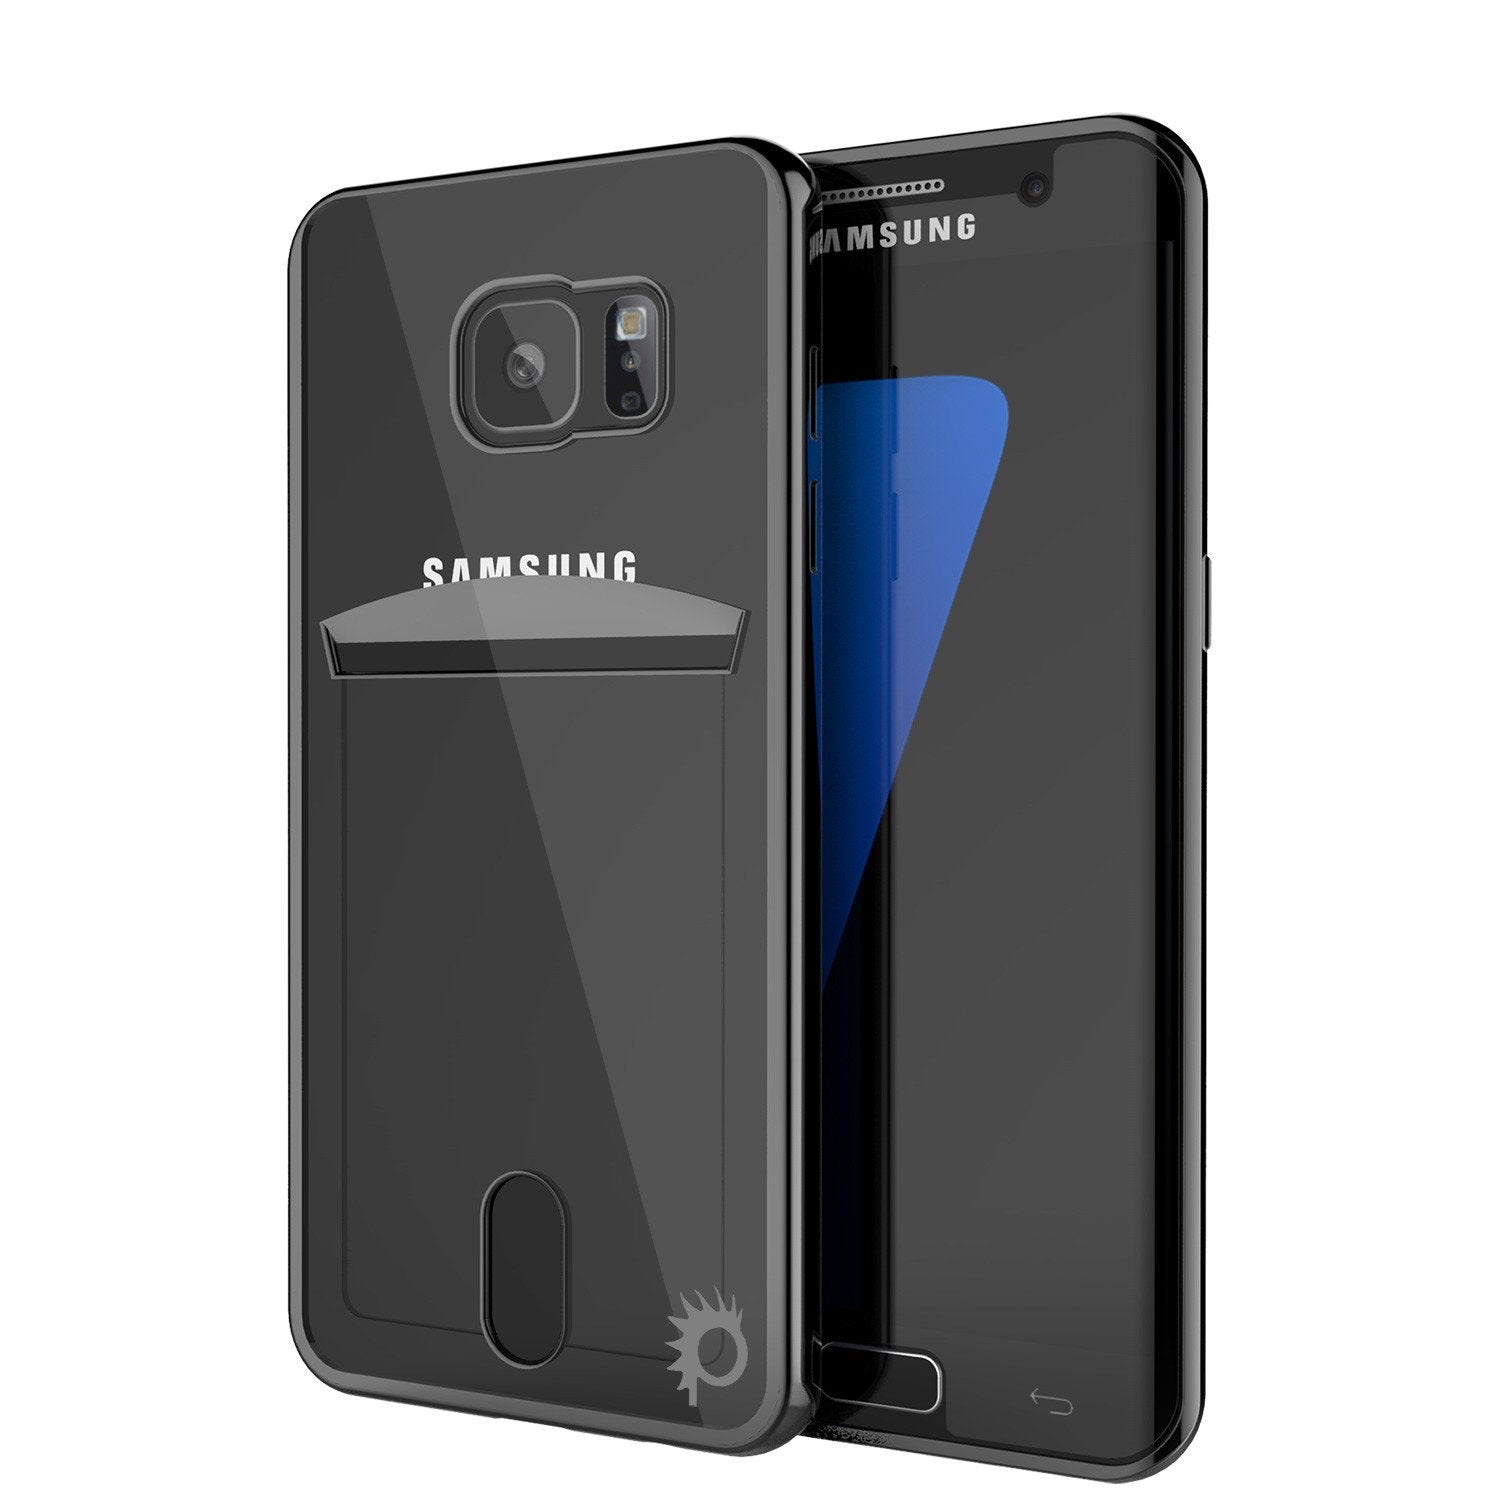 Galaxy S7 EDGE Case, PUNKCASE® LUCID Black Series | Card Slot | SHIELD Screen Protector | Ultra fit